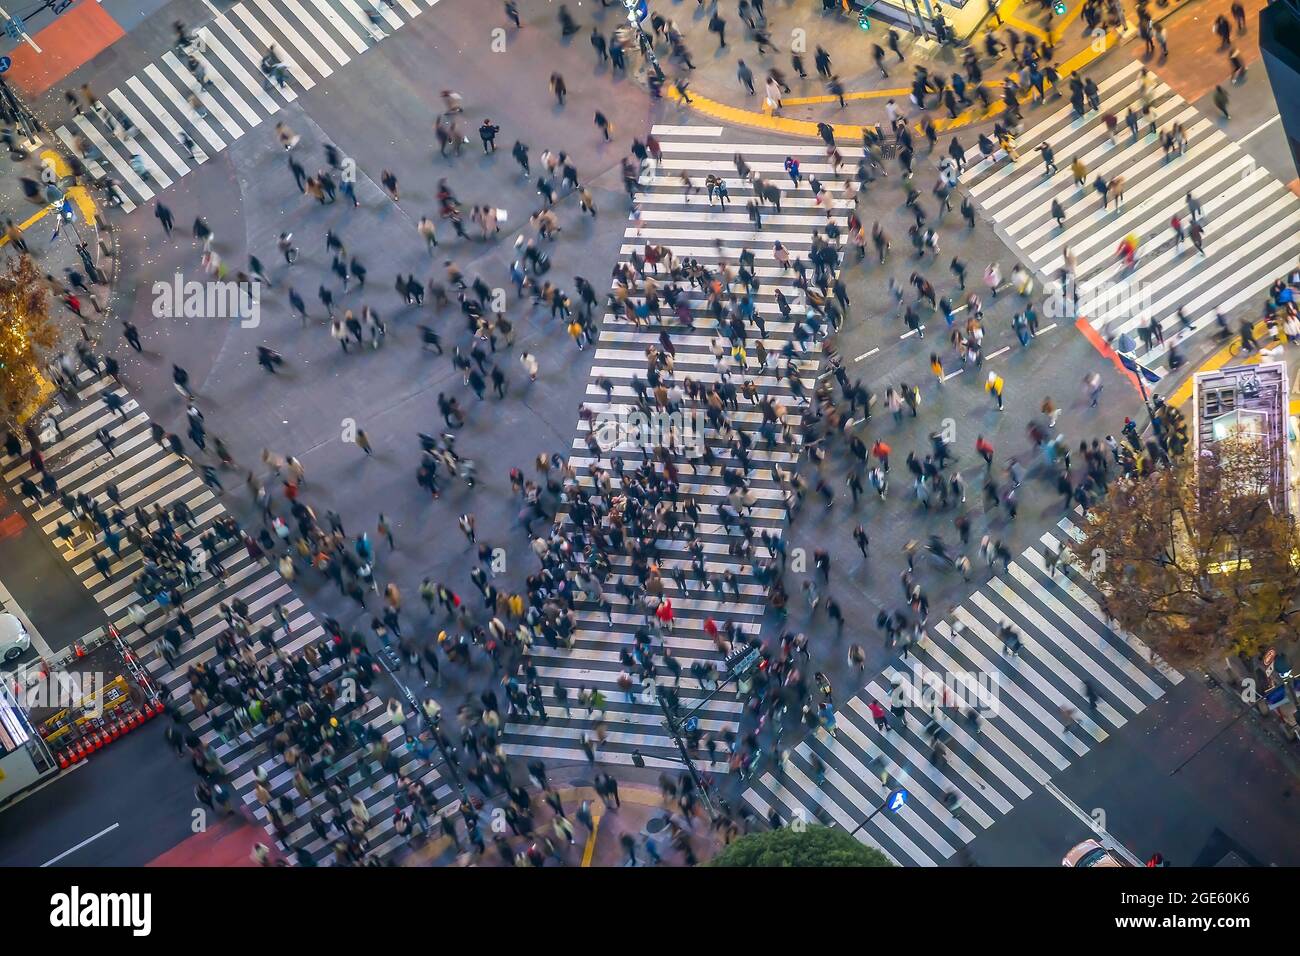 Shibuya Crossing from top view at night in Tokyo, Japan (slow shutter speed blur effect) Stock Photo